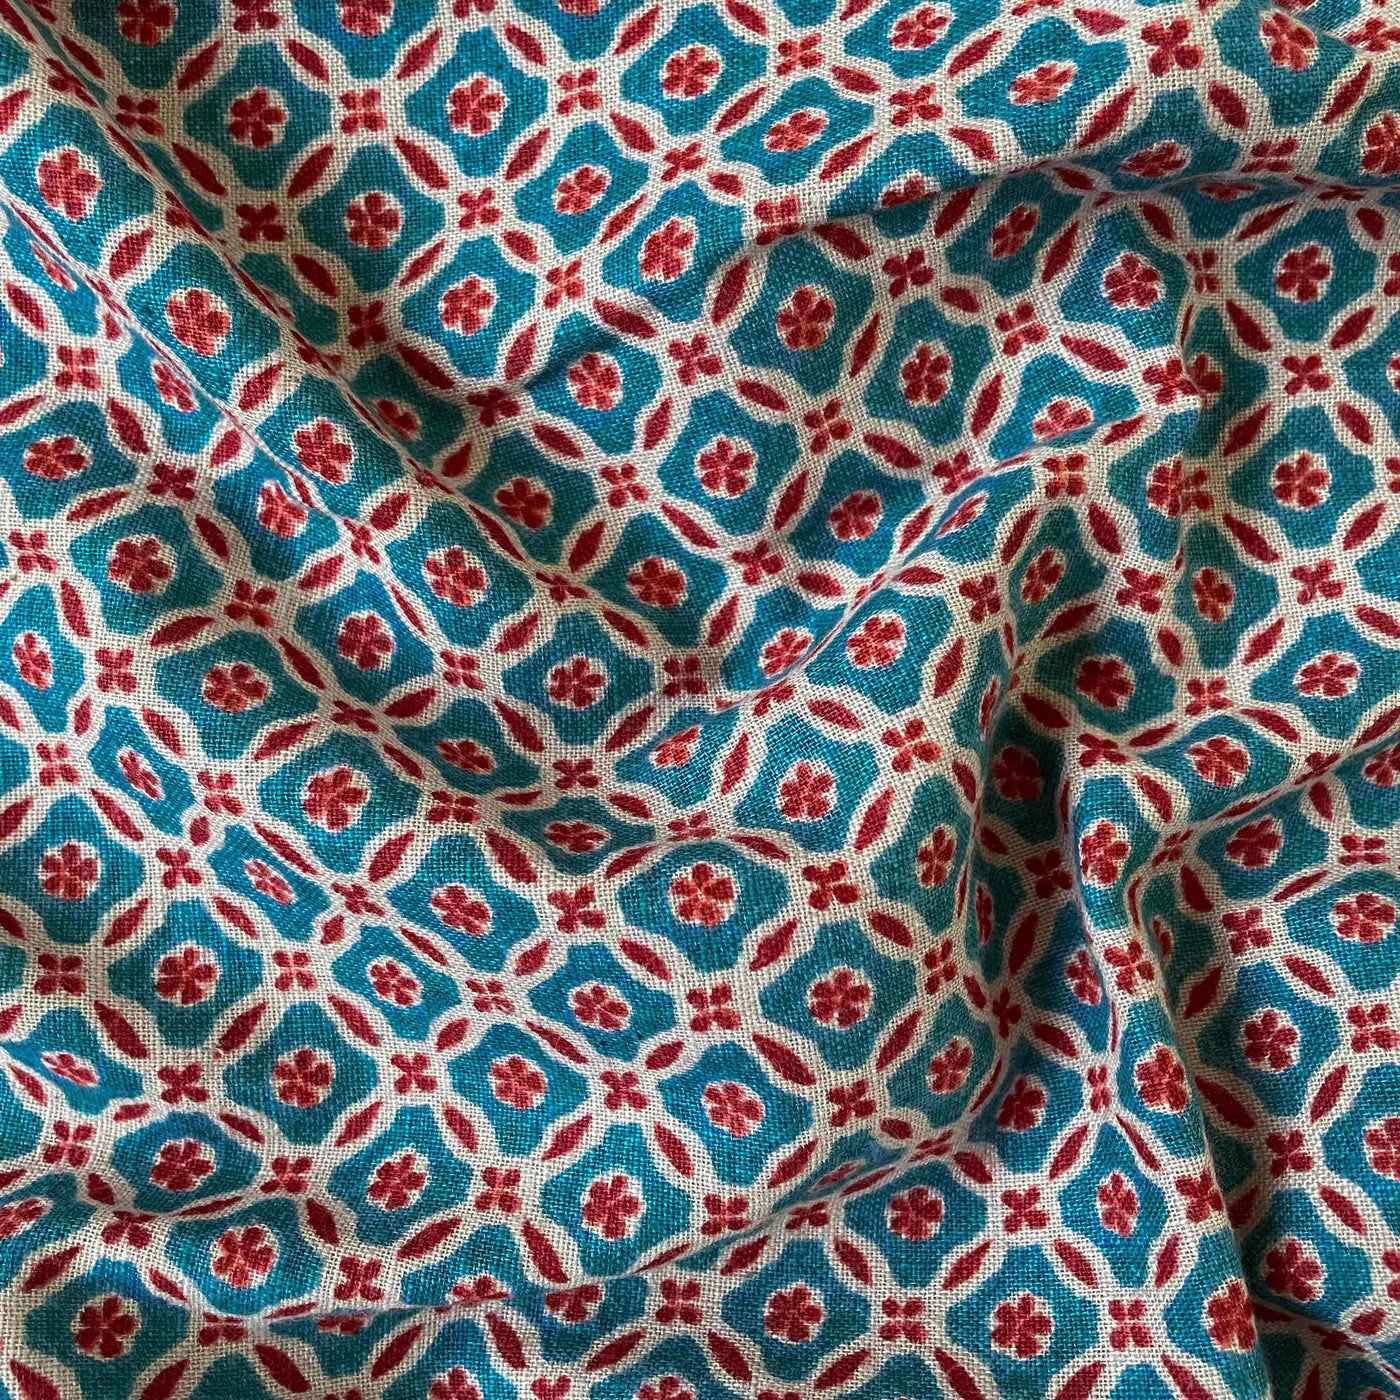 Fabric Pandit Cut Piece (CUT PIECE) Dusty Blue & Maroon Vintage Floral Jaal Hand Block Printed Pure Cotton Silk Fabric (Width 42 Inches)